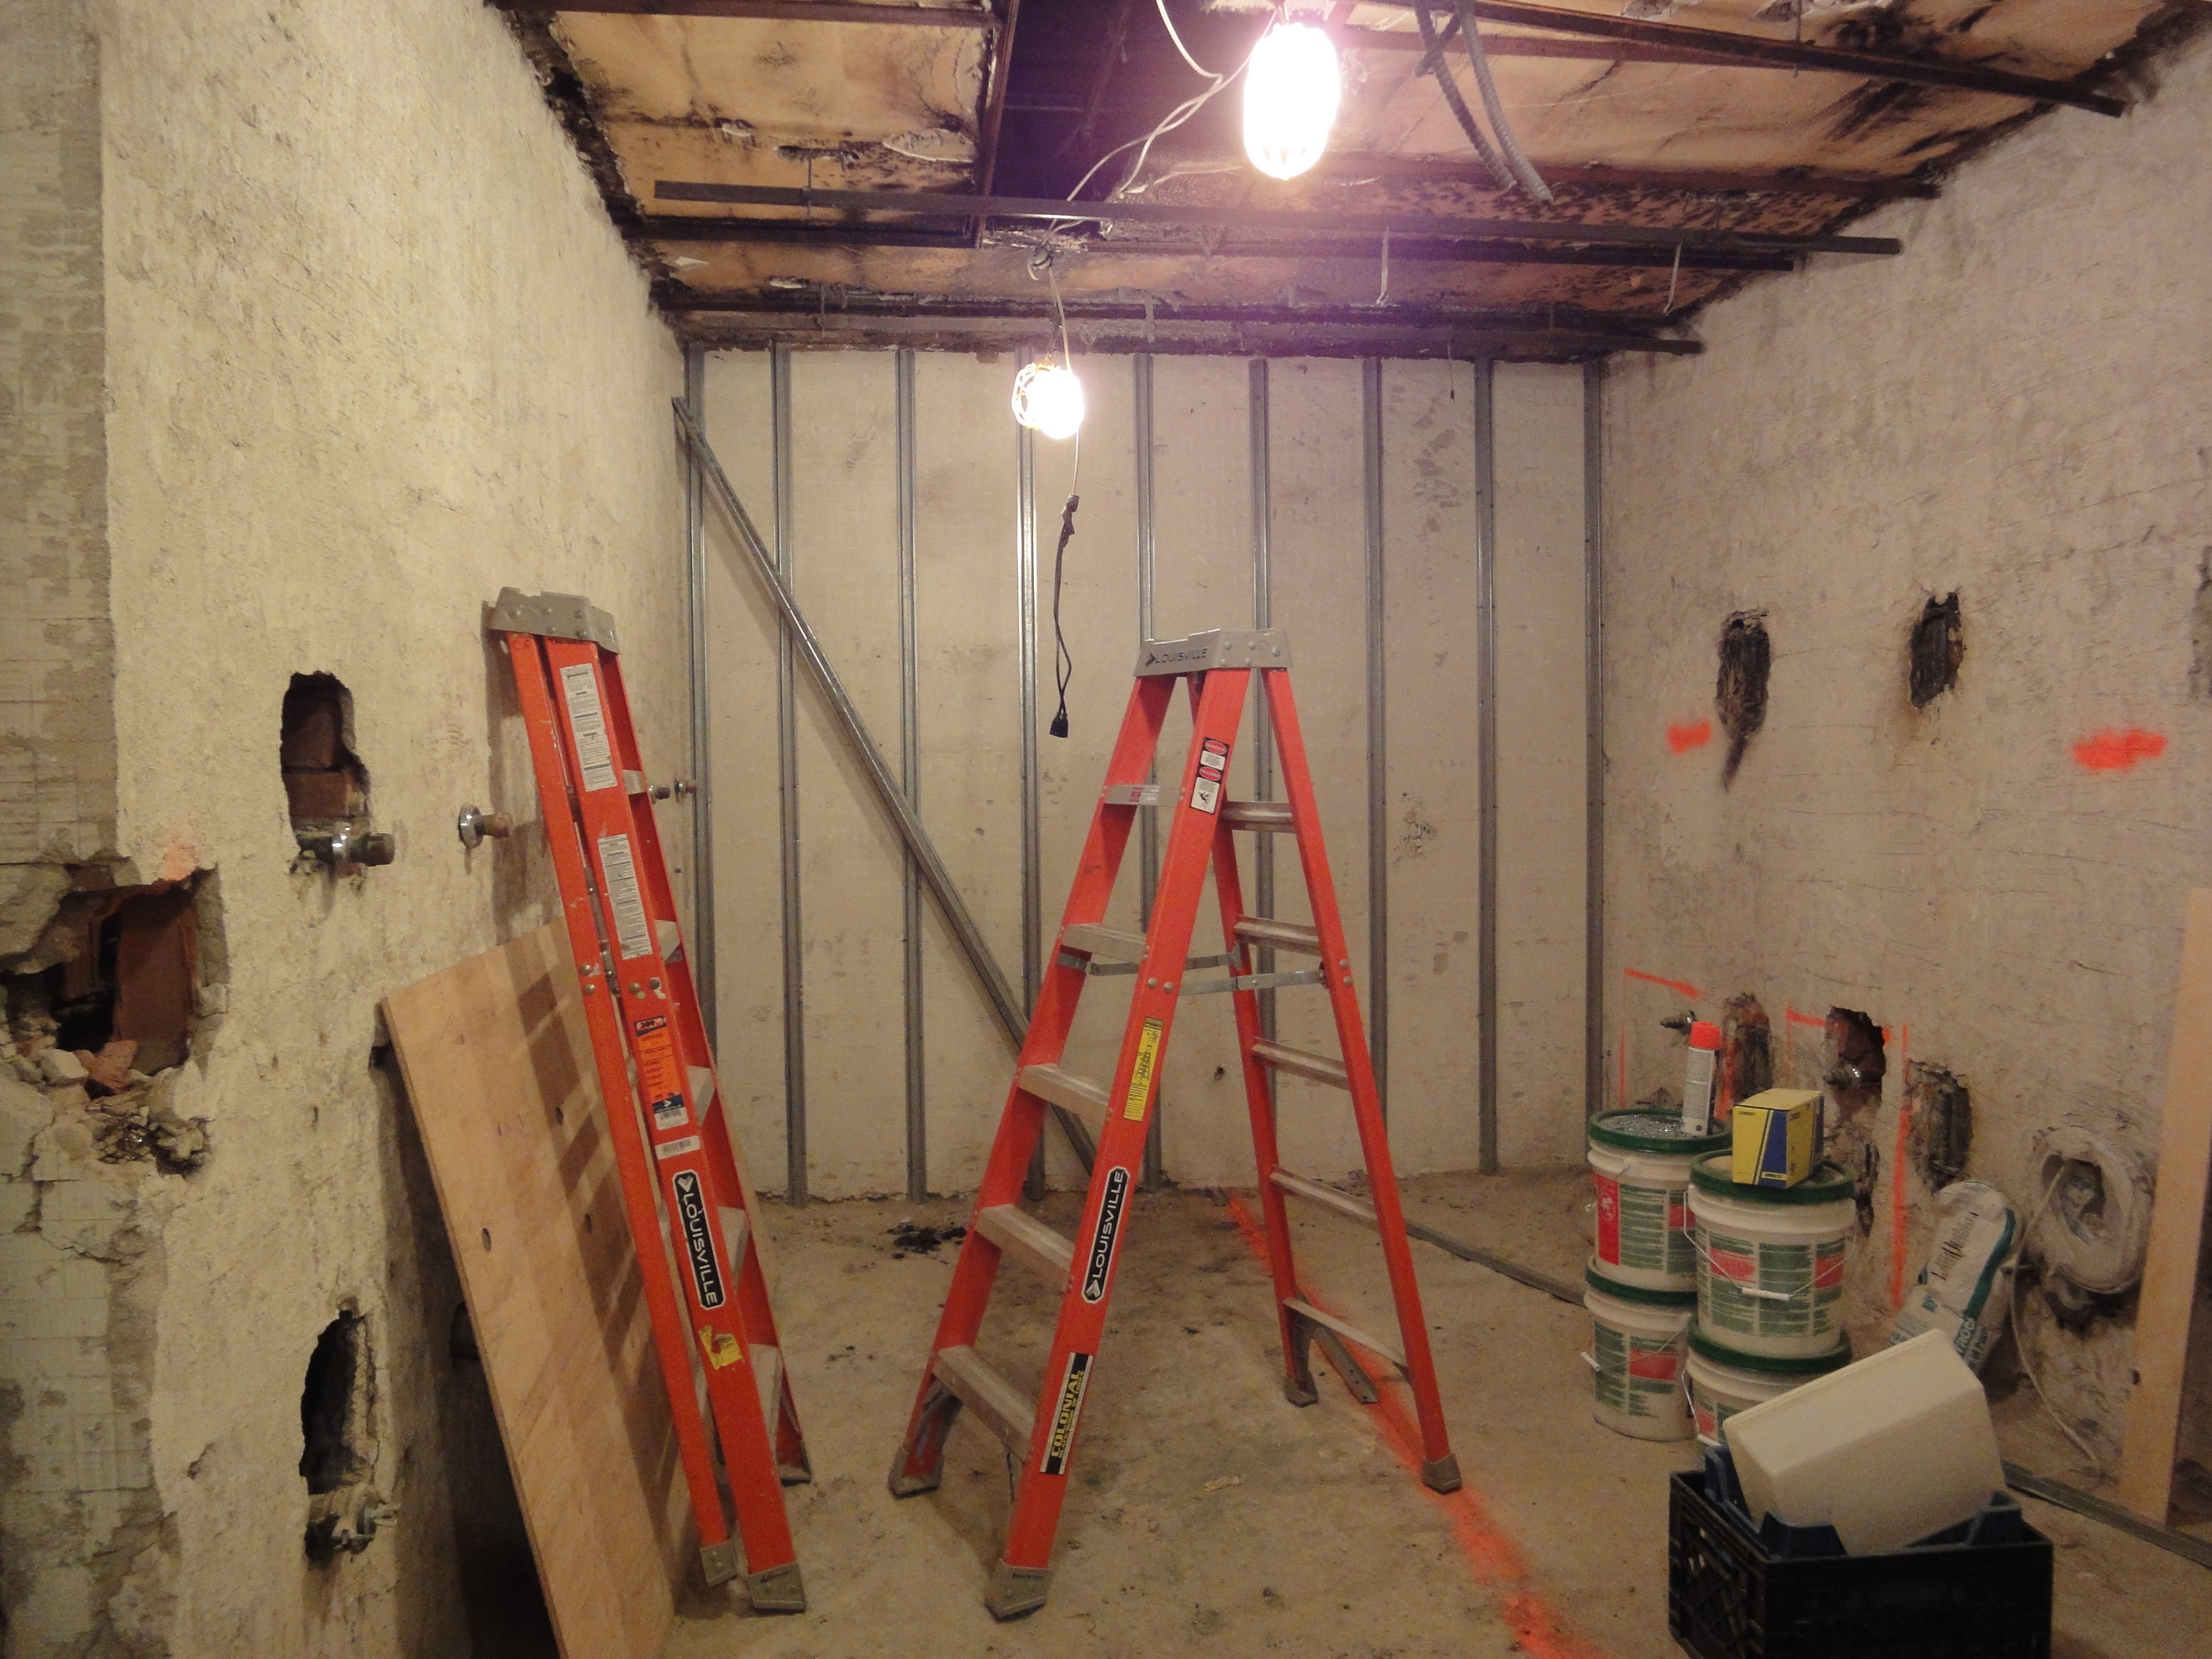 new york athletic club. Talisen Construction Management & General Contracting: Construction site of bathroom. Ladders and metal wall studs occupy the room with a temporary light.